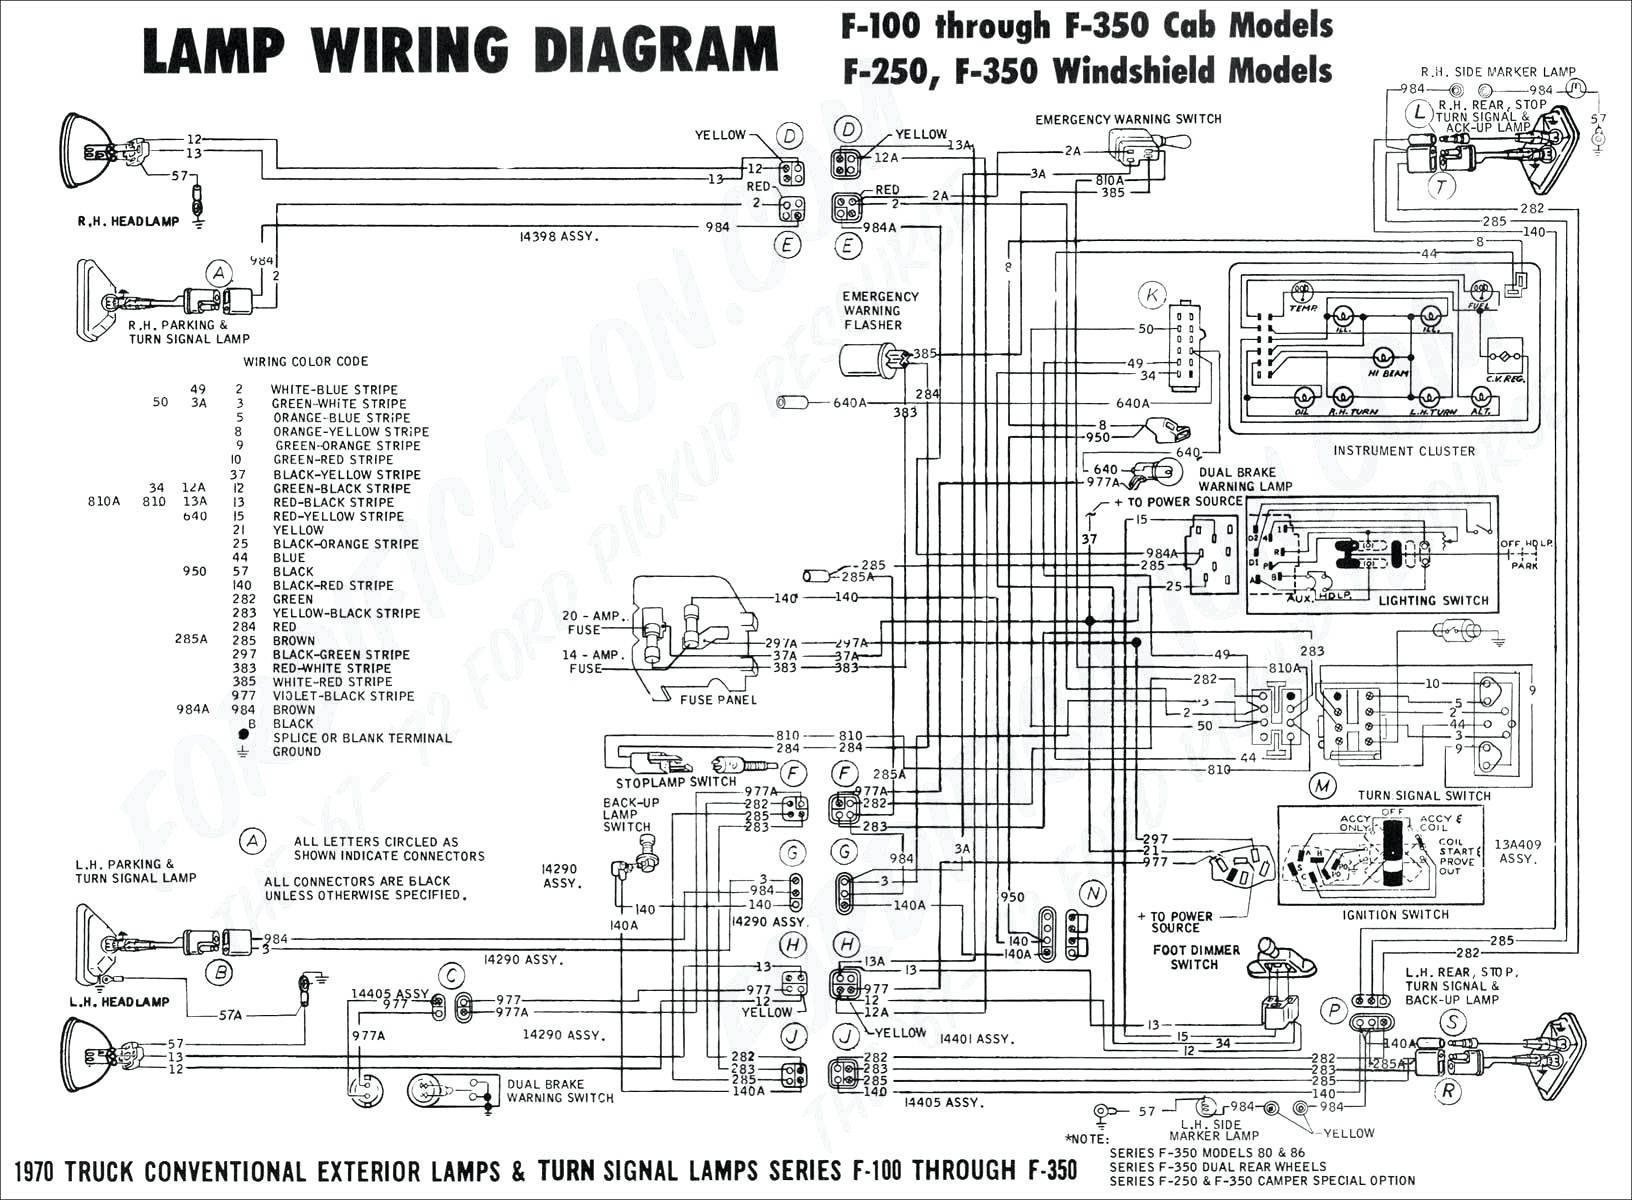 2002 Nissan Frontier Engine Diagram Nissan Frontier Trailer Wiring Diagram Shahsramblings Of 2002 Nissan Frontier Engine Diagram